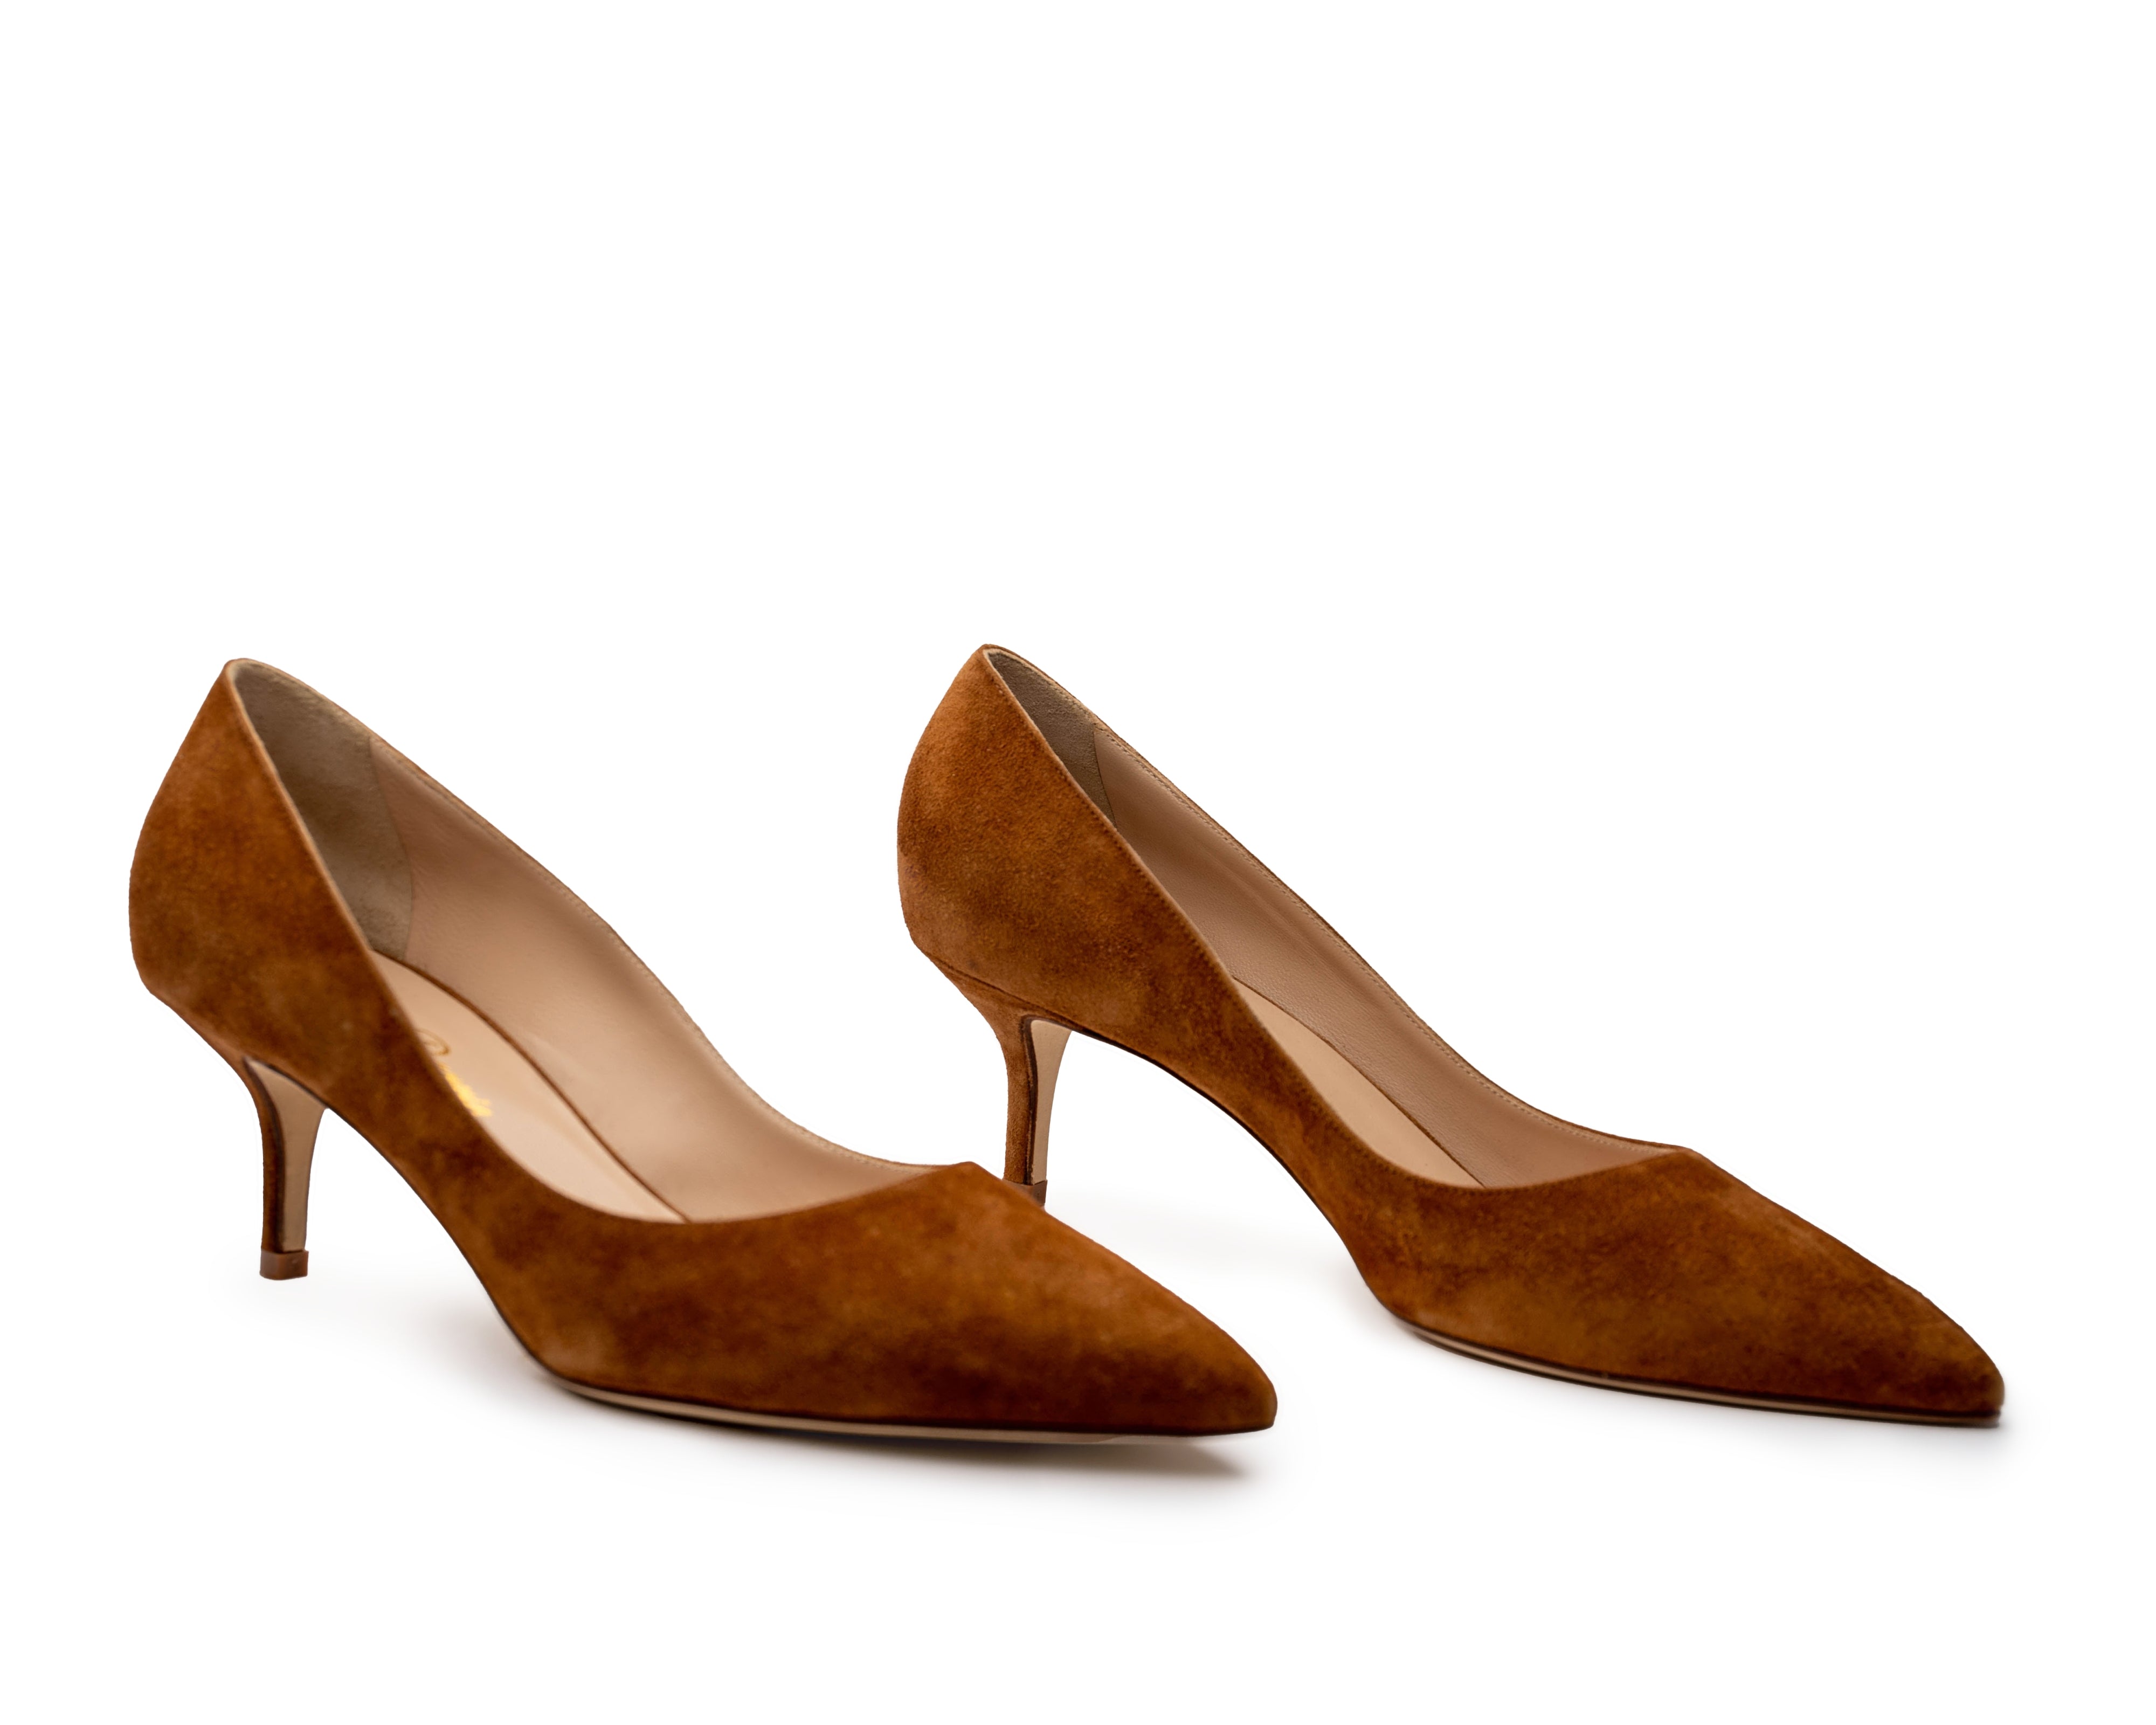 Italian Nappa leather pumps. Comfortable shoes true to your skin tone. Office Professional shoes. Nude pumps